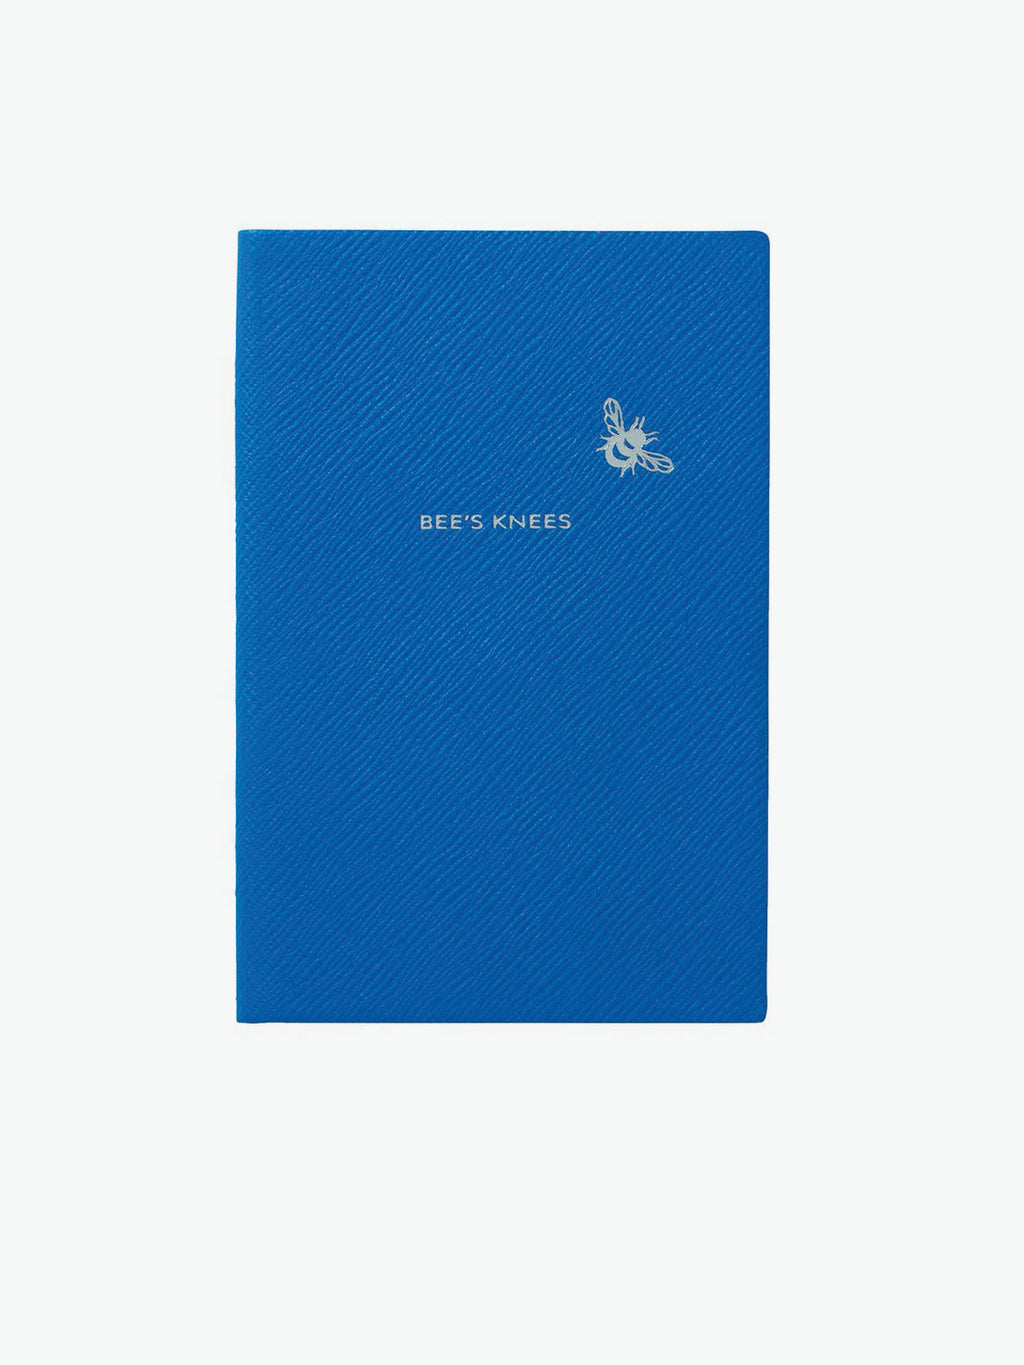 Smythson Bees Knees Notebook | A